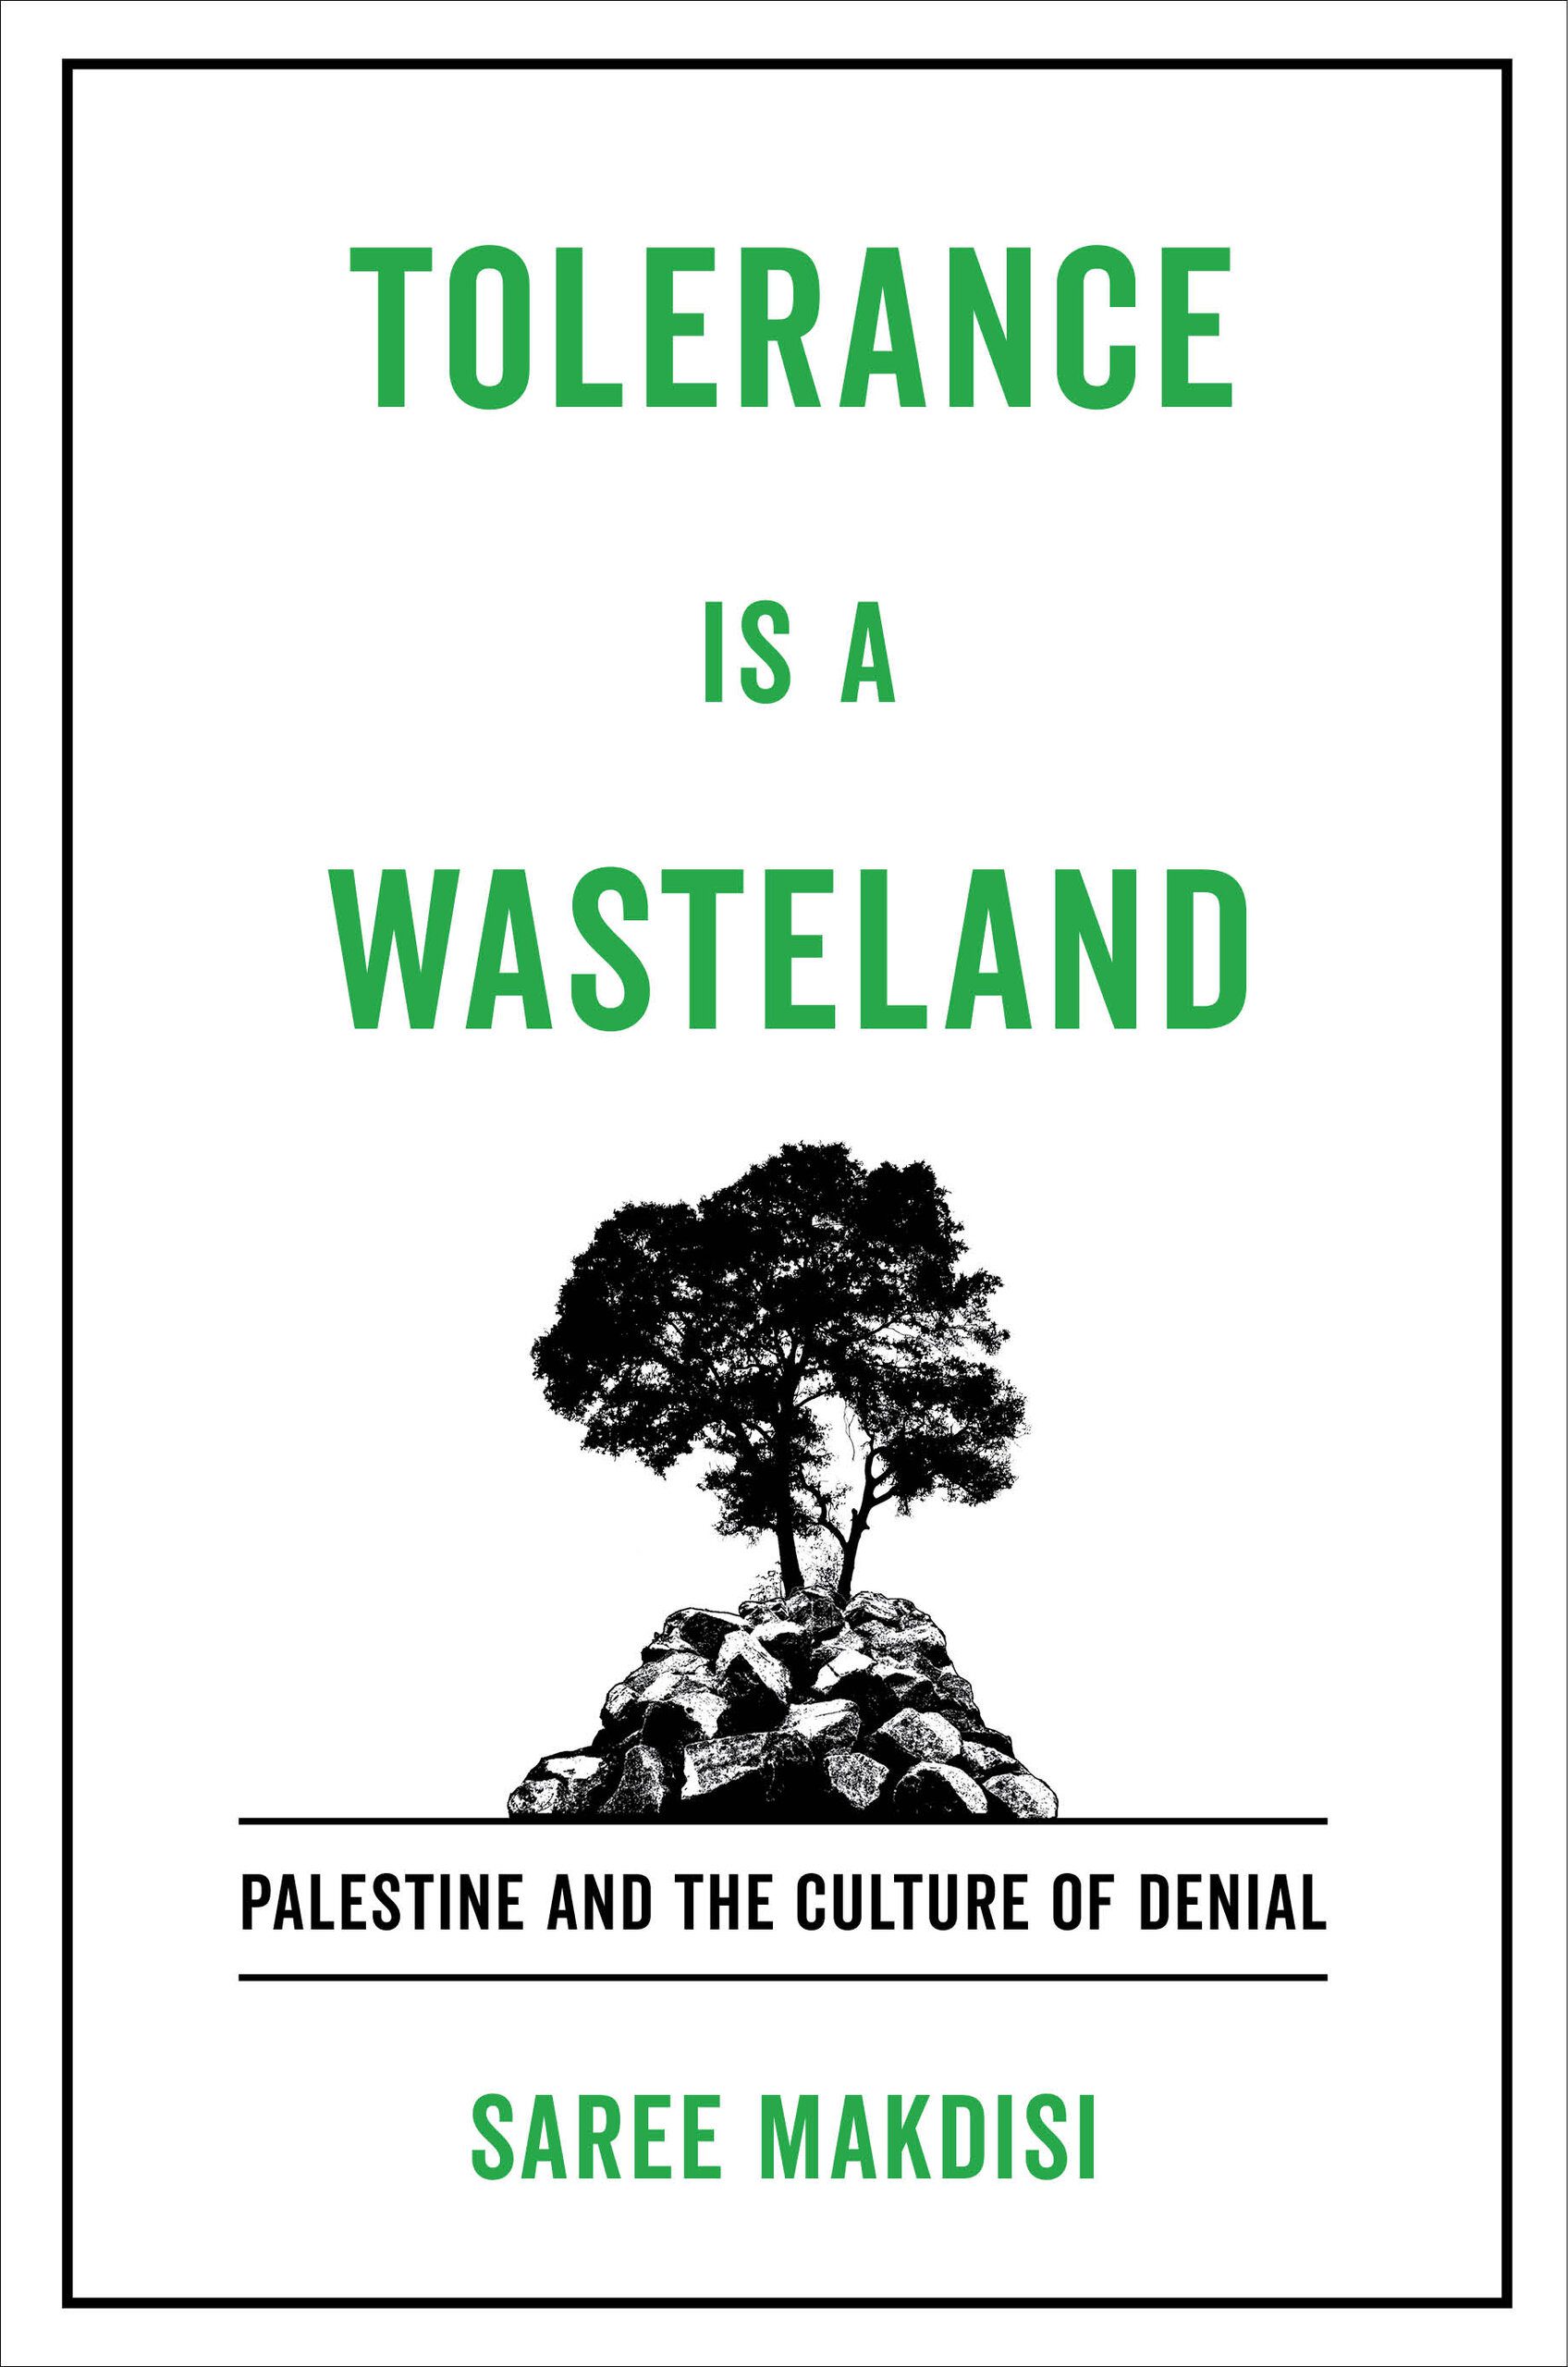 ‘Tolerance Is a Wasteland: Palestine and the Culture of Denial’ by Saree Makdisi